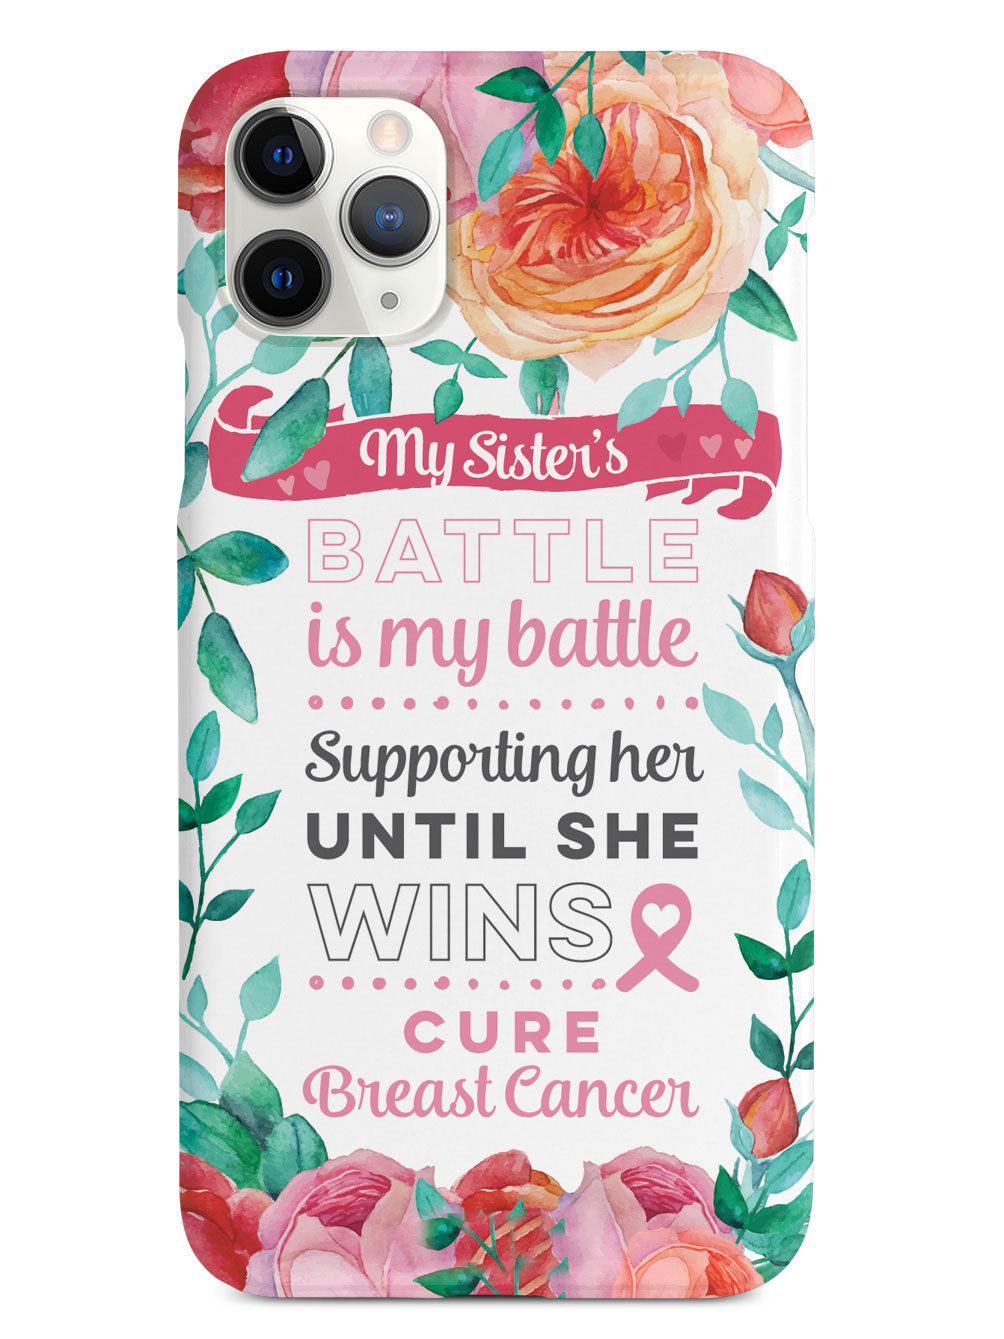 My Sister's Battle - Breast Cancer Awareness Case